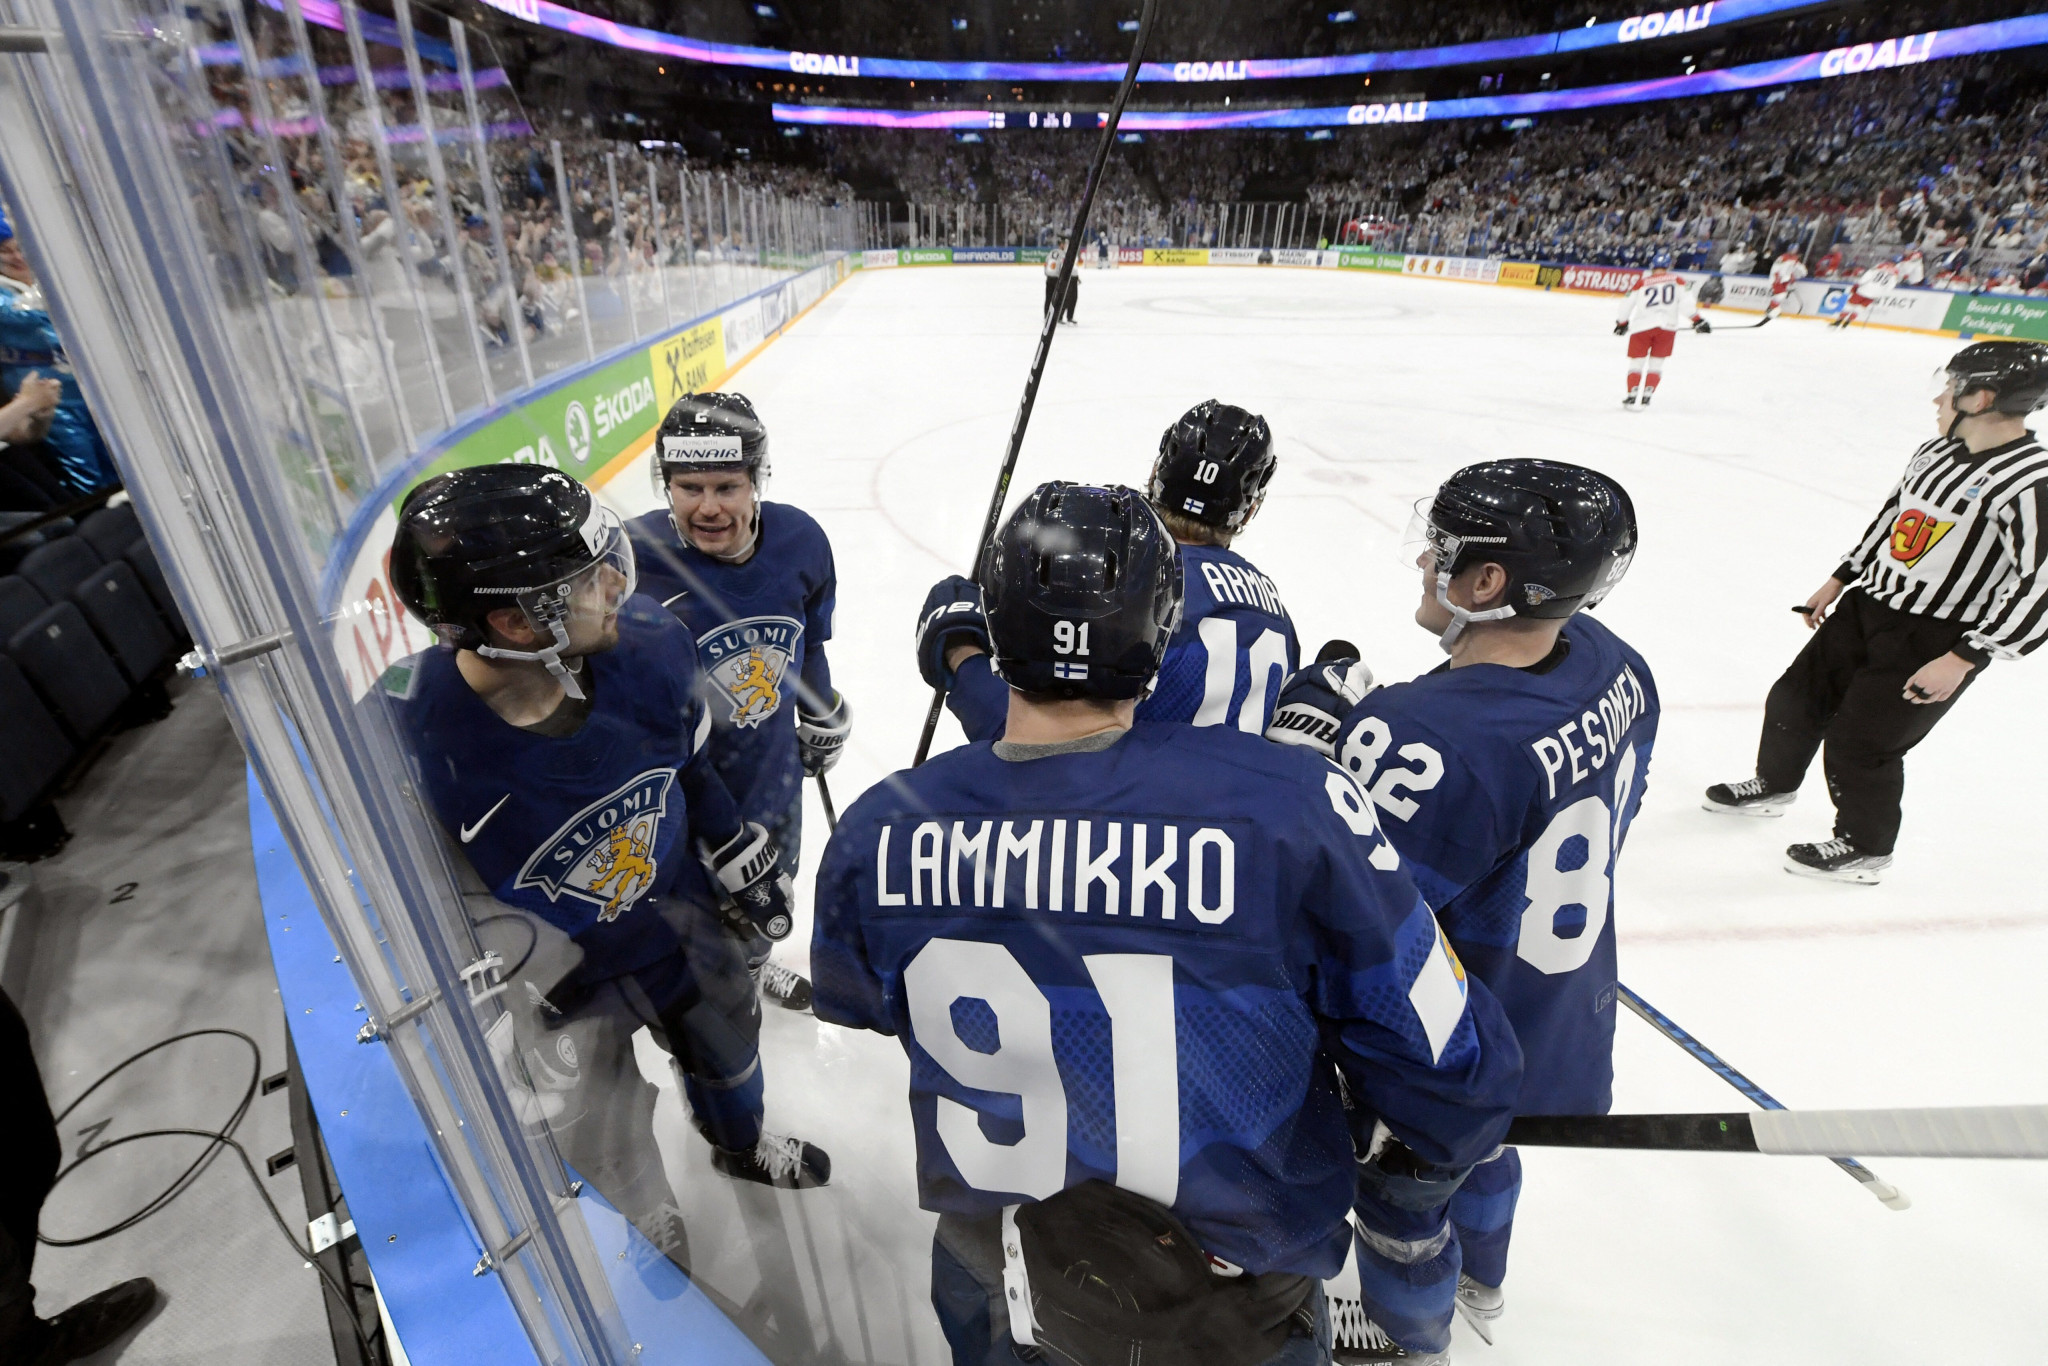 Tampere is set to host matches at the IIHF men's World Championship for the second year running in 2023 ©Getty Images